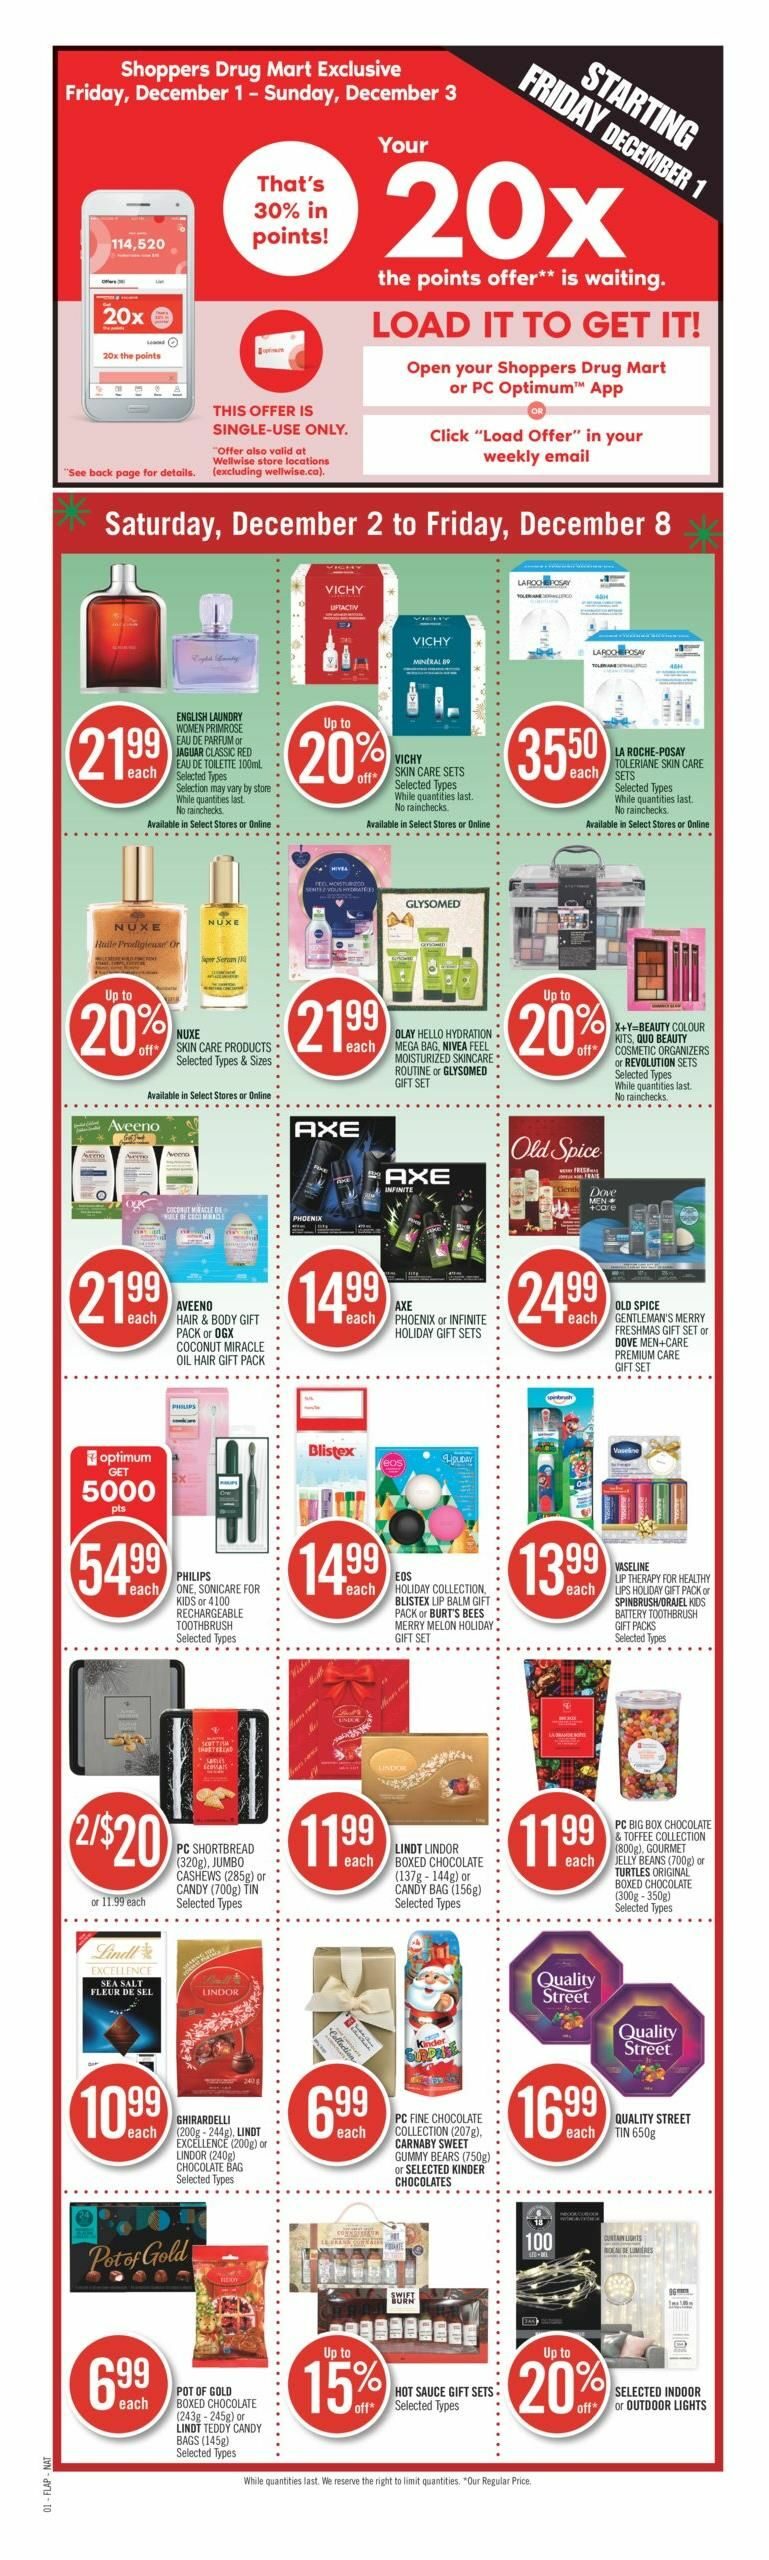 DEPEND or POISE INCONTINENCE PRODUCTS, Shoppers Drug Mart deals this week, Shoppers Drug Mart flyer